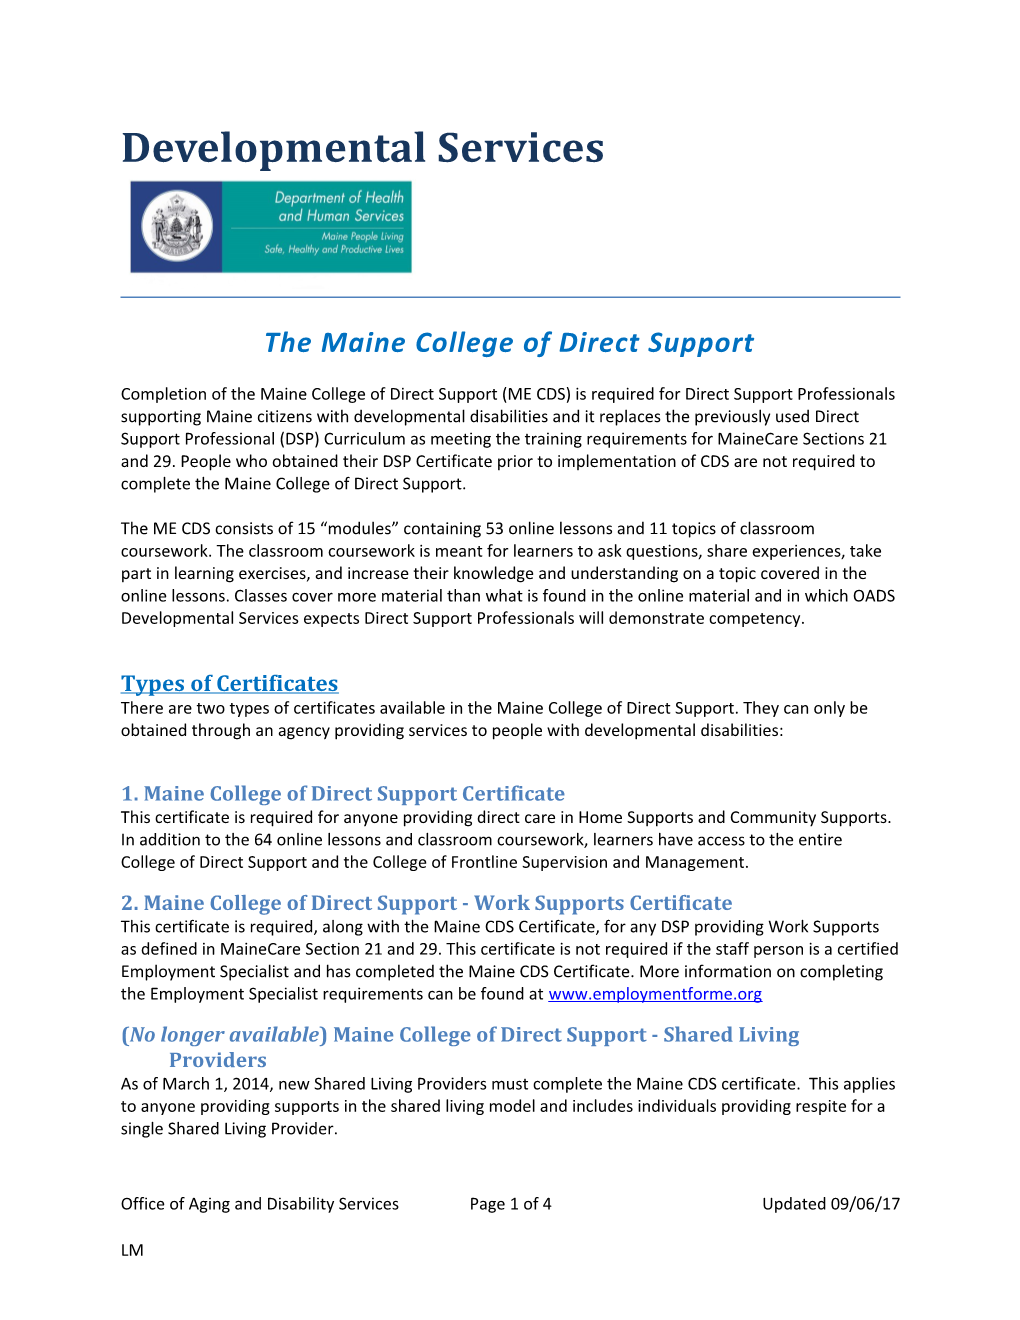 The Maine College of Direct Support s1